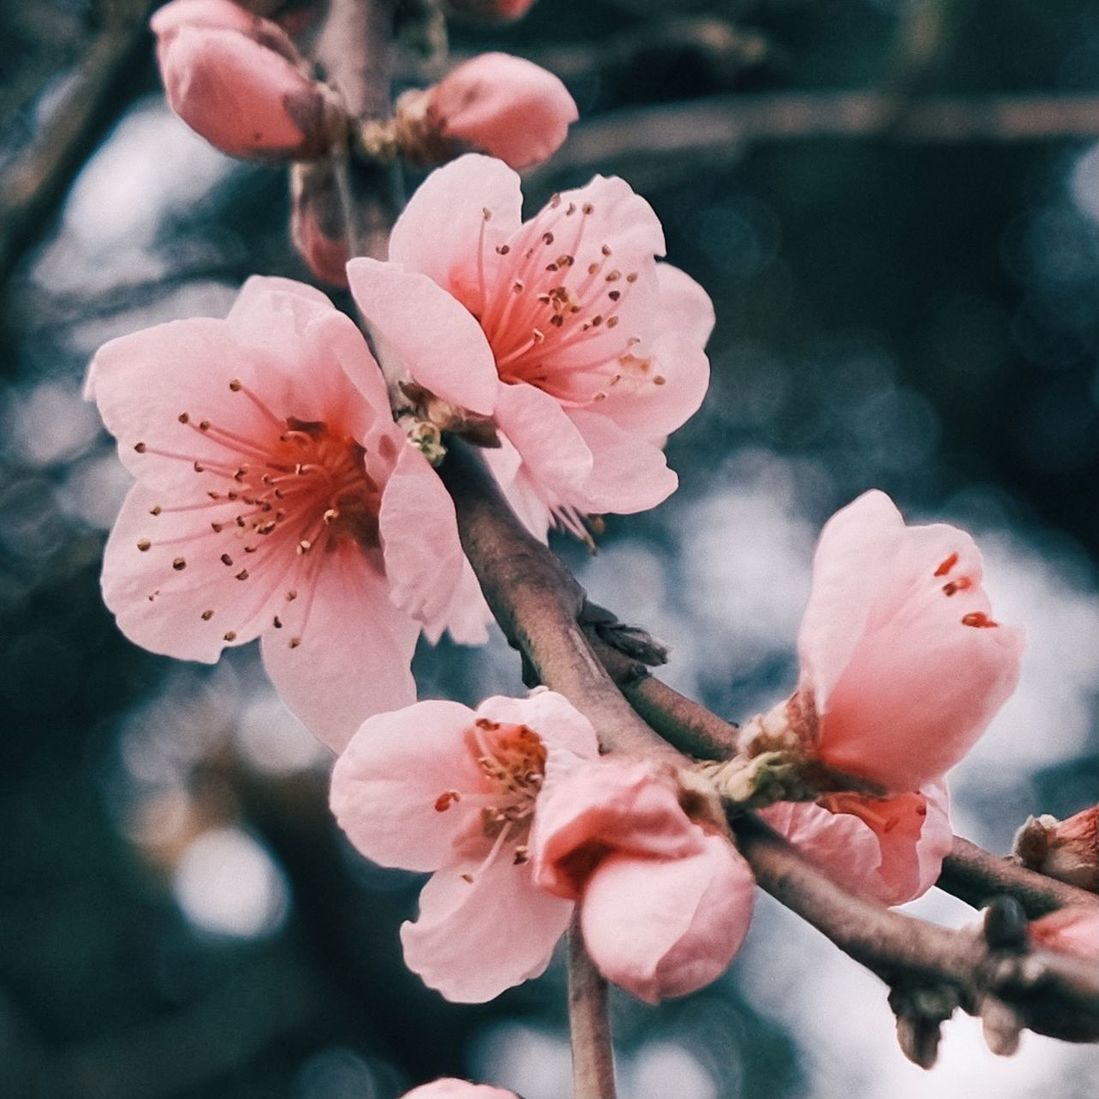 plant, flower, flowering plant, beauty in nature, pink, freshness, fragility, blossom, springtime, growth, spring, nature, tree, flower head, inflorescence, close-up, petal, pollen, branch, macro photography, stamen, botany, no people, cherry blossom, outdoors, focus on foreground, produce, day